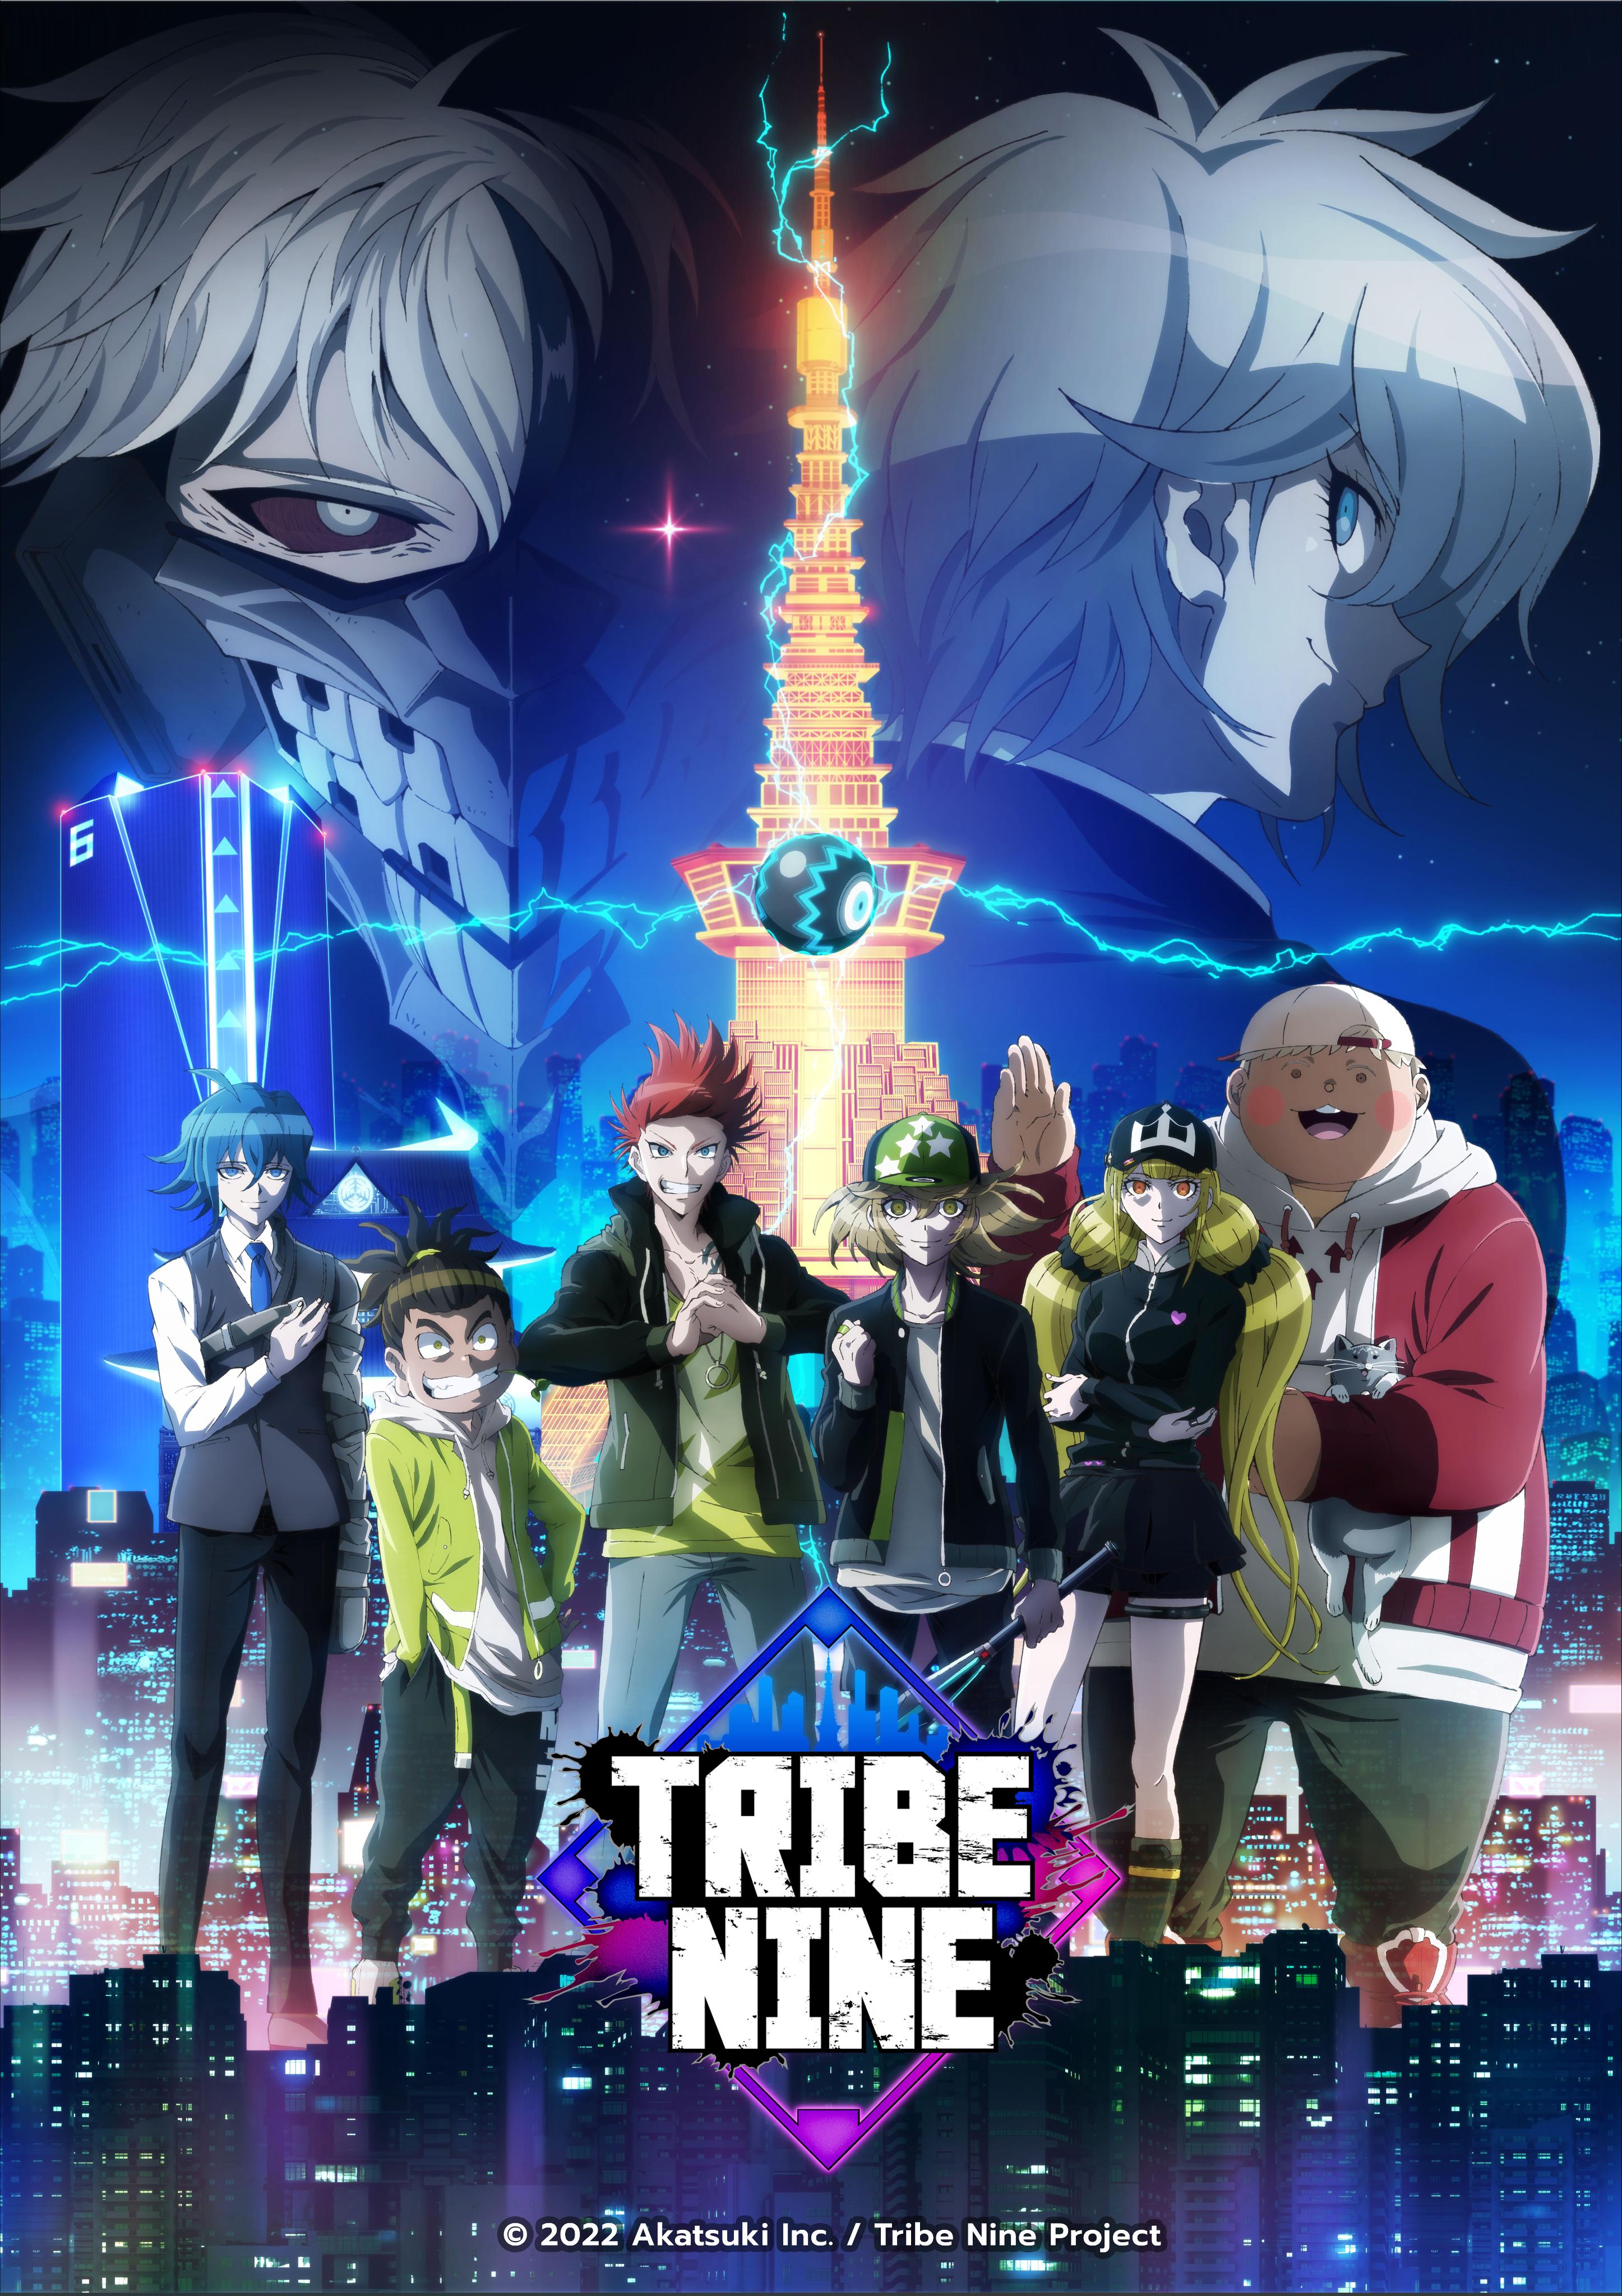 A key visual for the upcoming Tribe Nine TV anime, featuring the main cast of extreme baseball players posing in front of a mysteriously lit Tokyo Tower while the sky-scrapers of the city seem like toy buildings around them. 